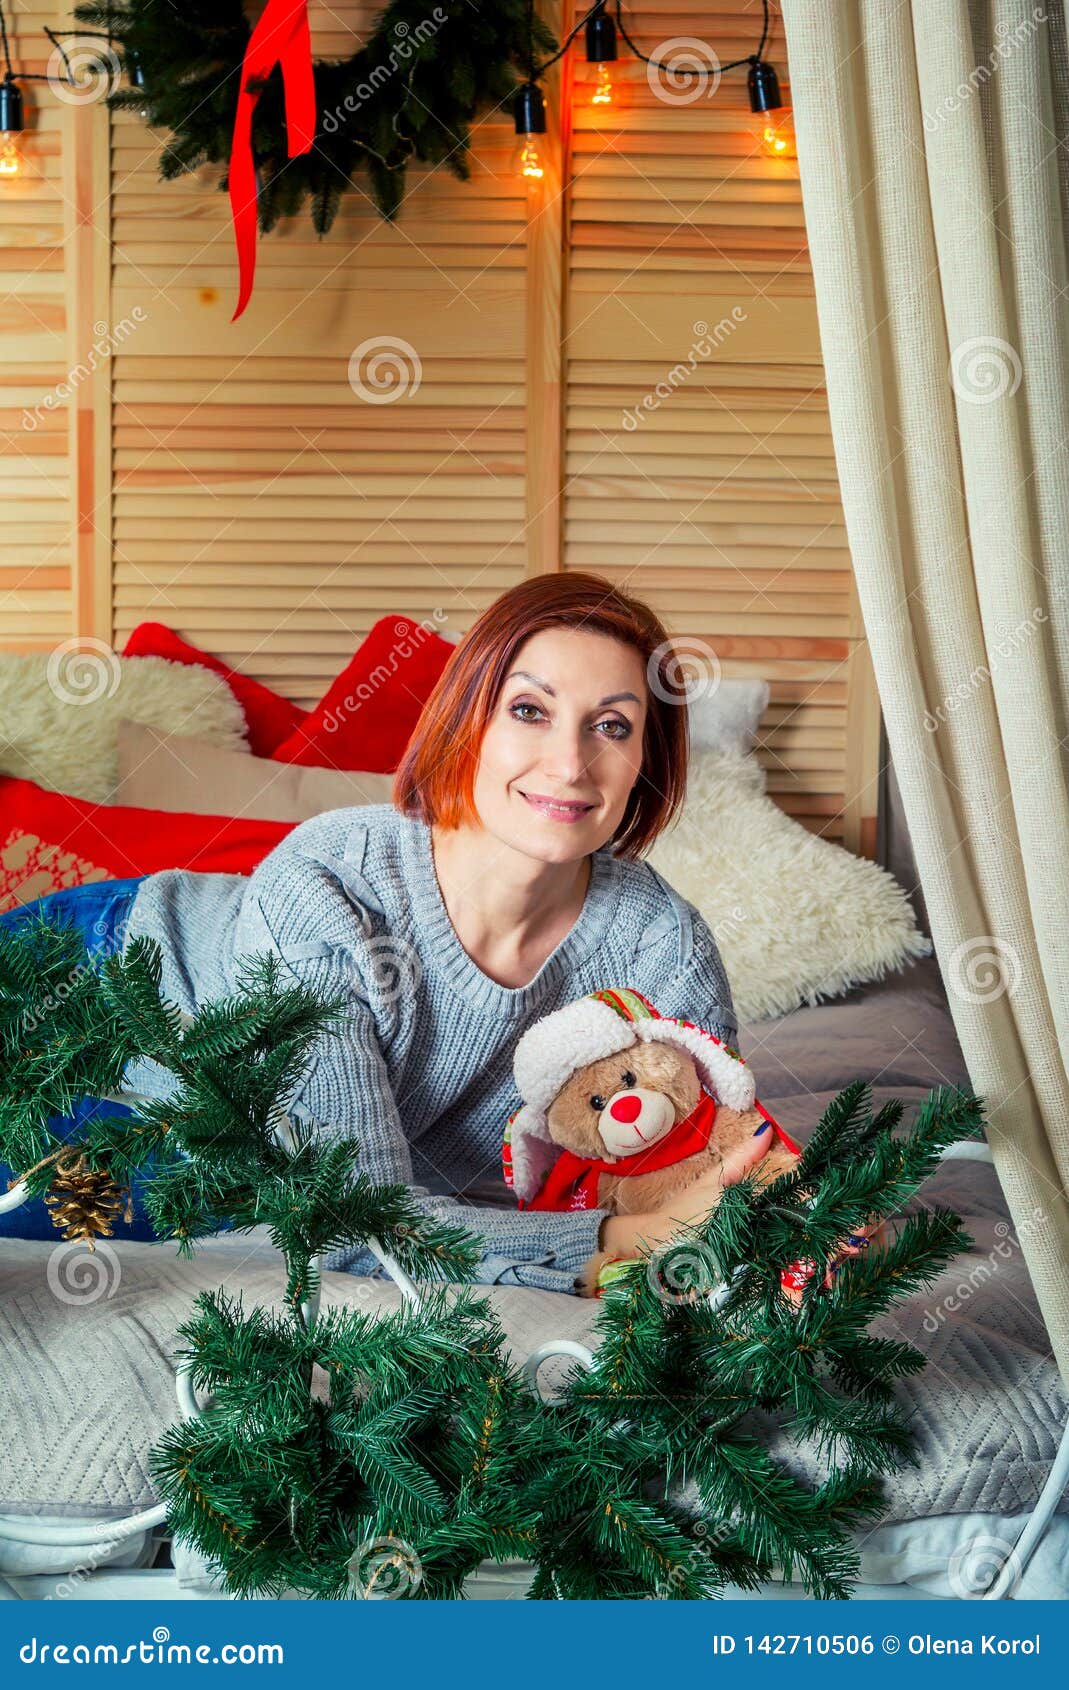 Portrait Of Beautiful Smiling Woman Laying In A Bedroom With Christmas Lights And Decorations